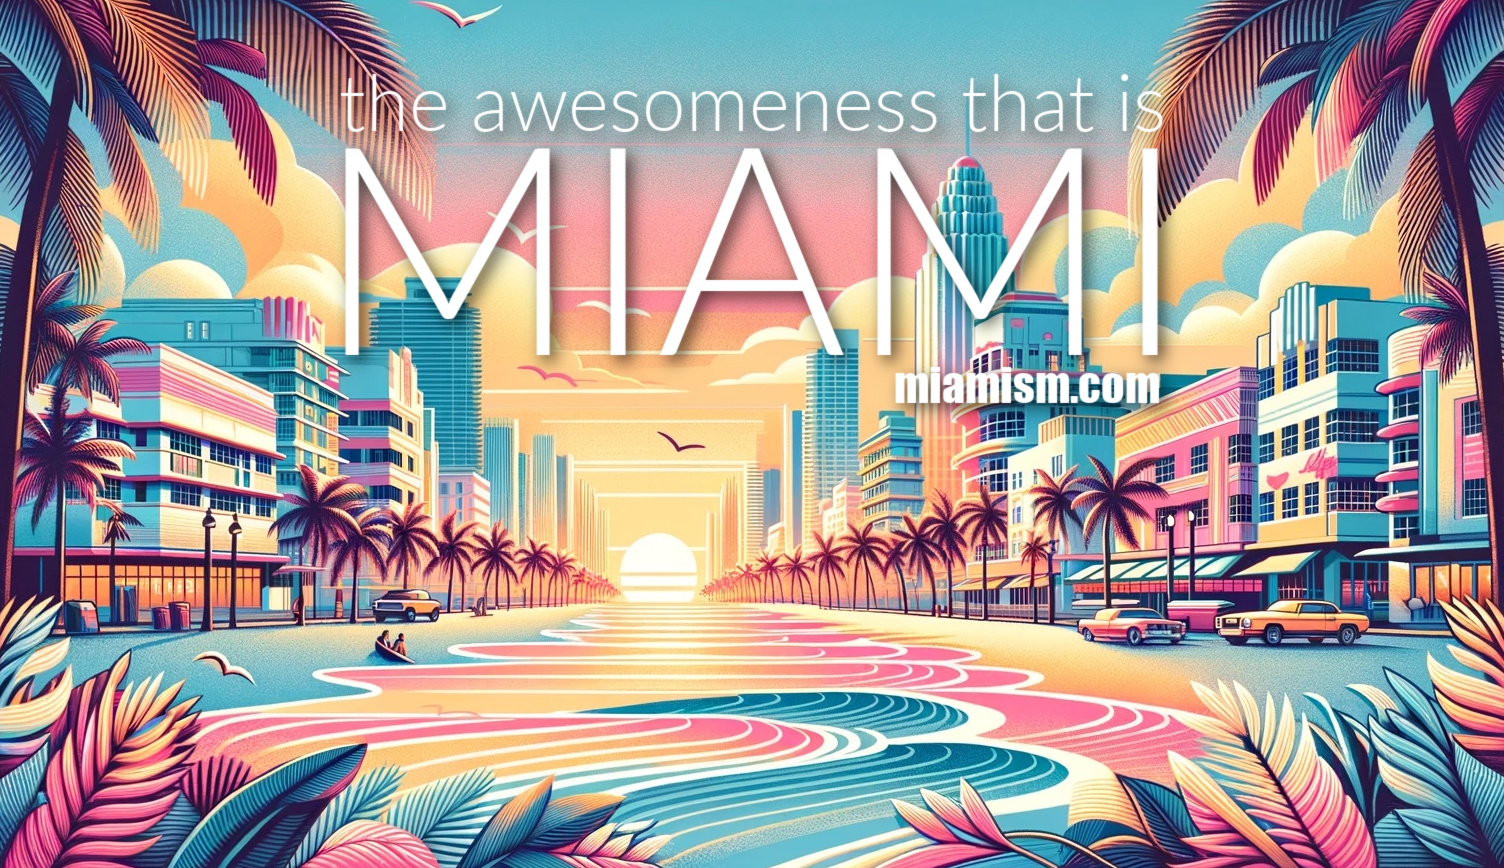 The awesomeness that is Miami